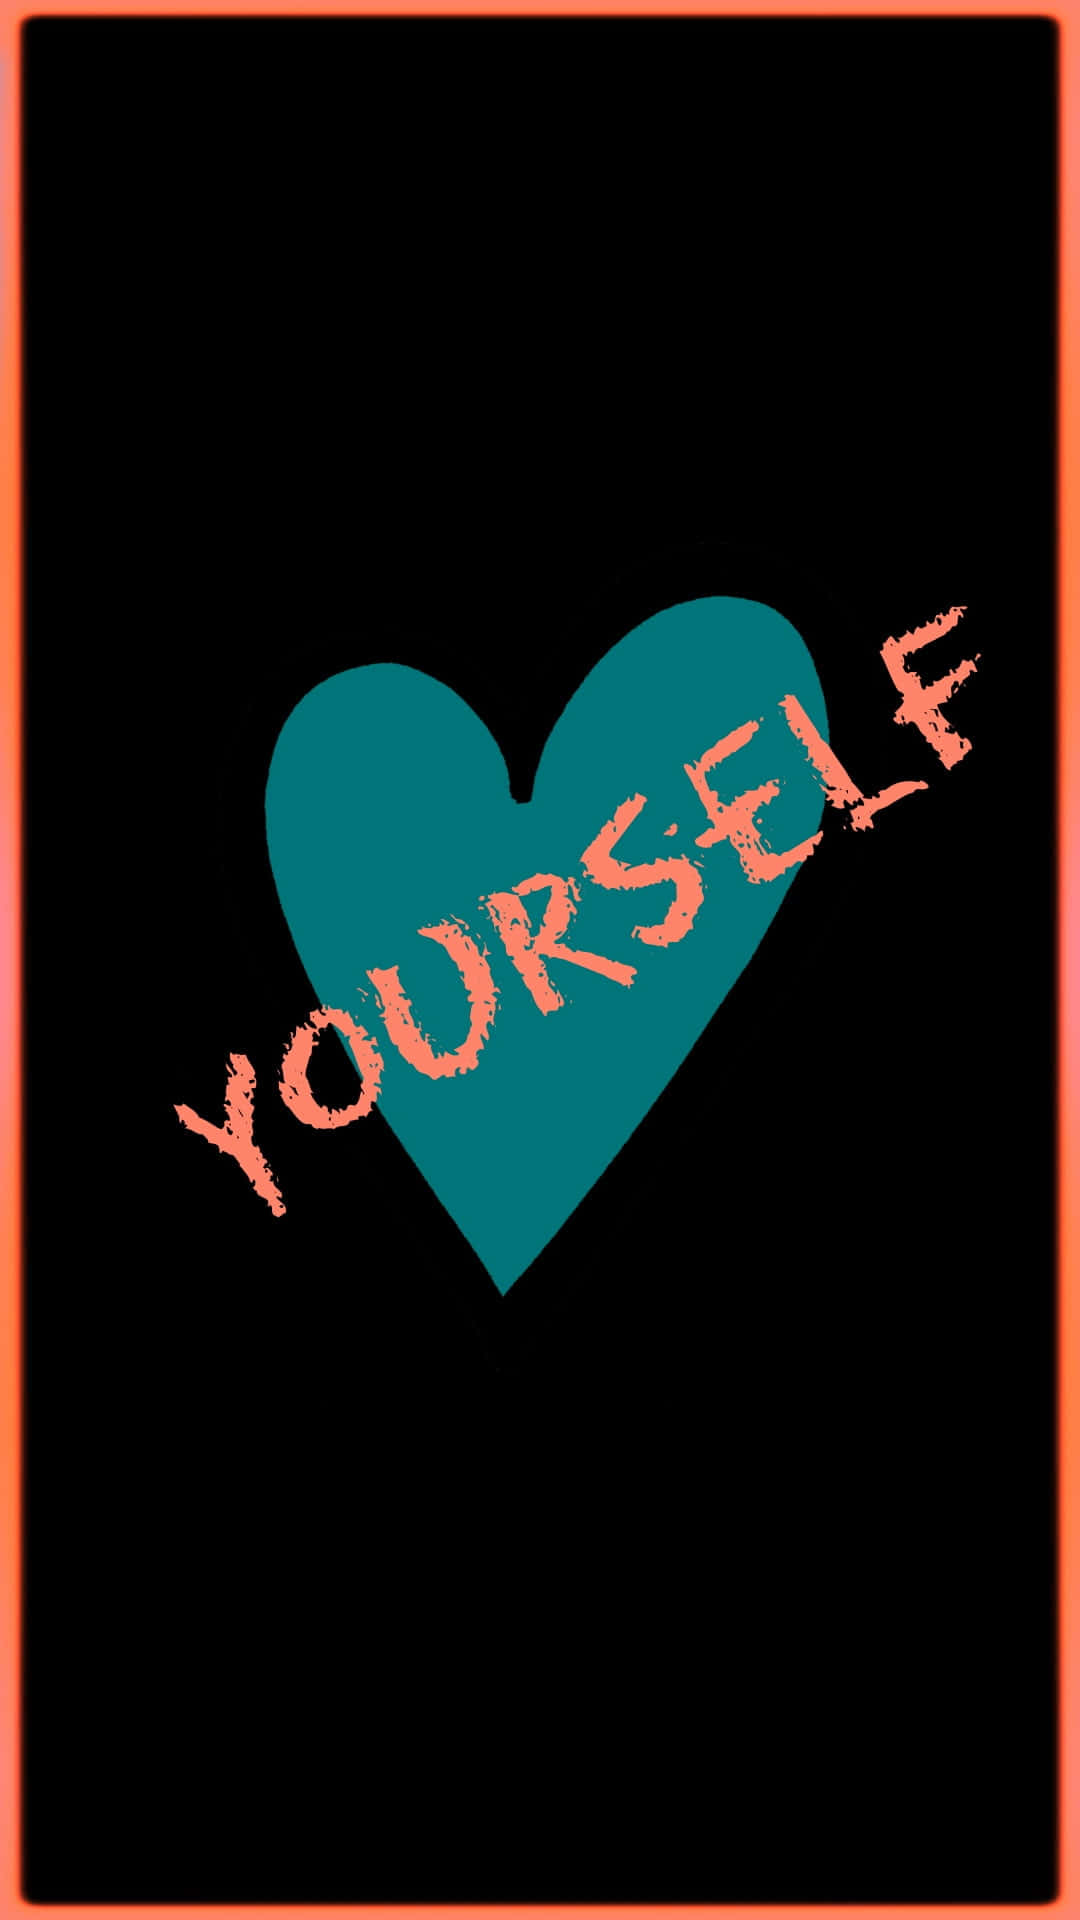 Caption: Love Yourself - Inspirational Wallpaper Background